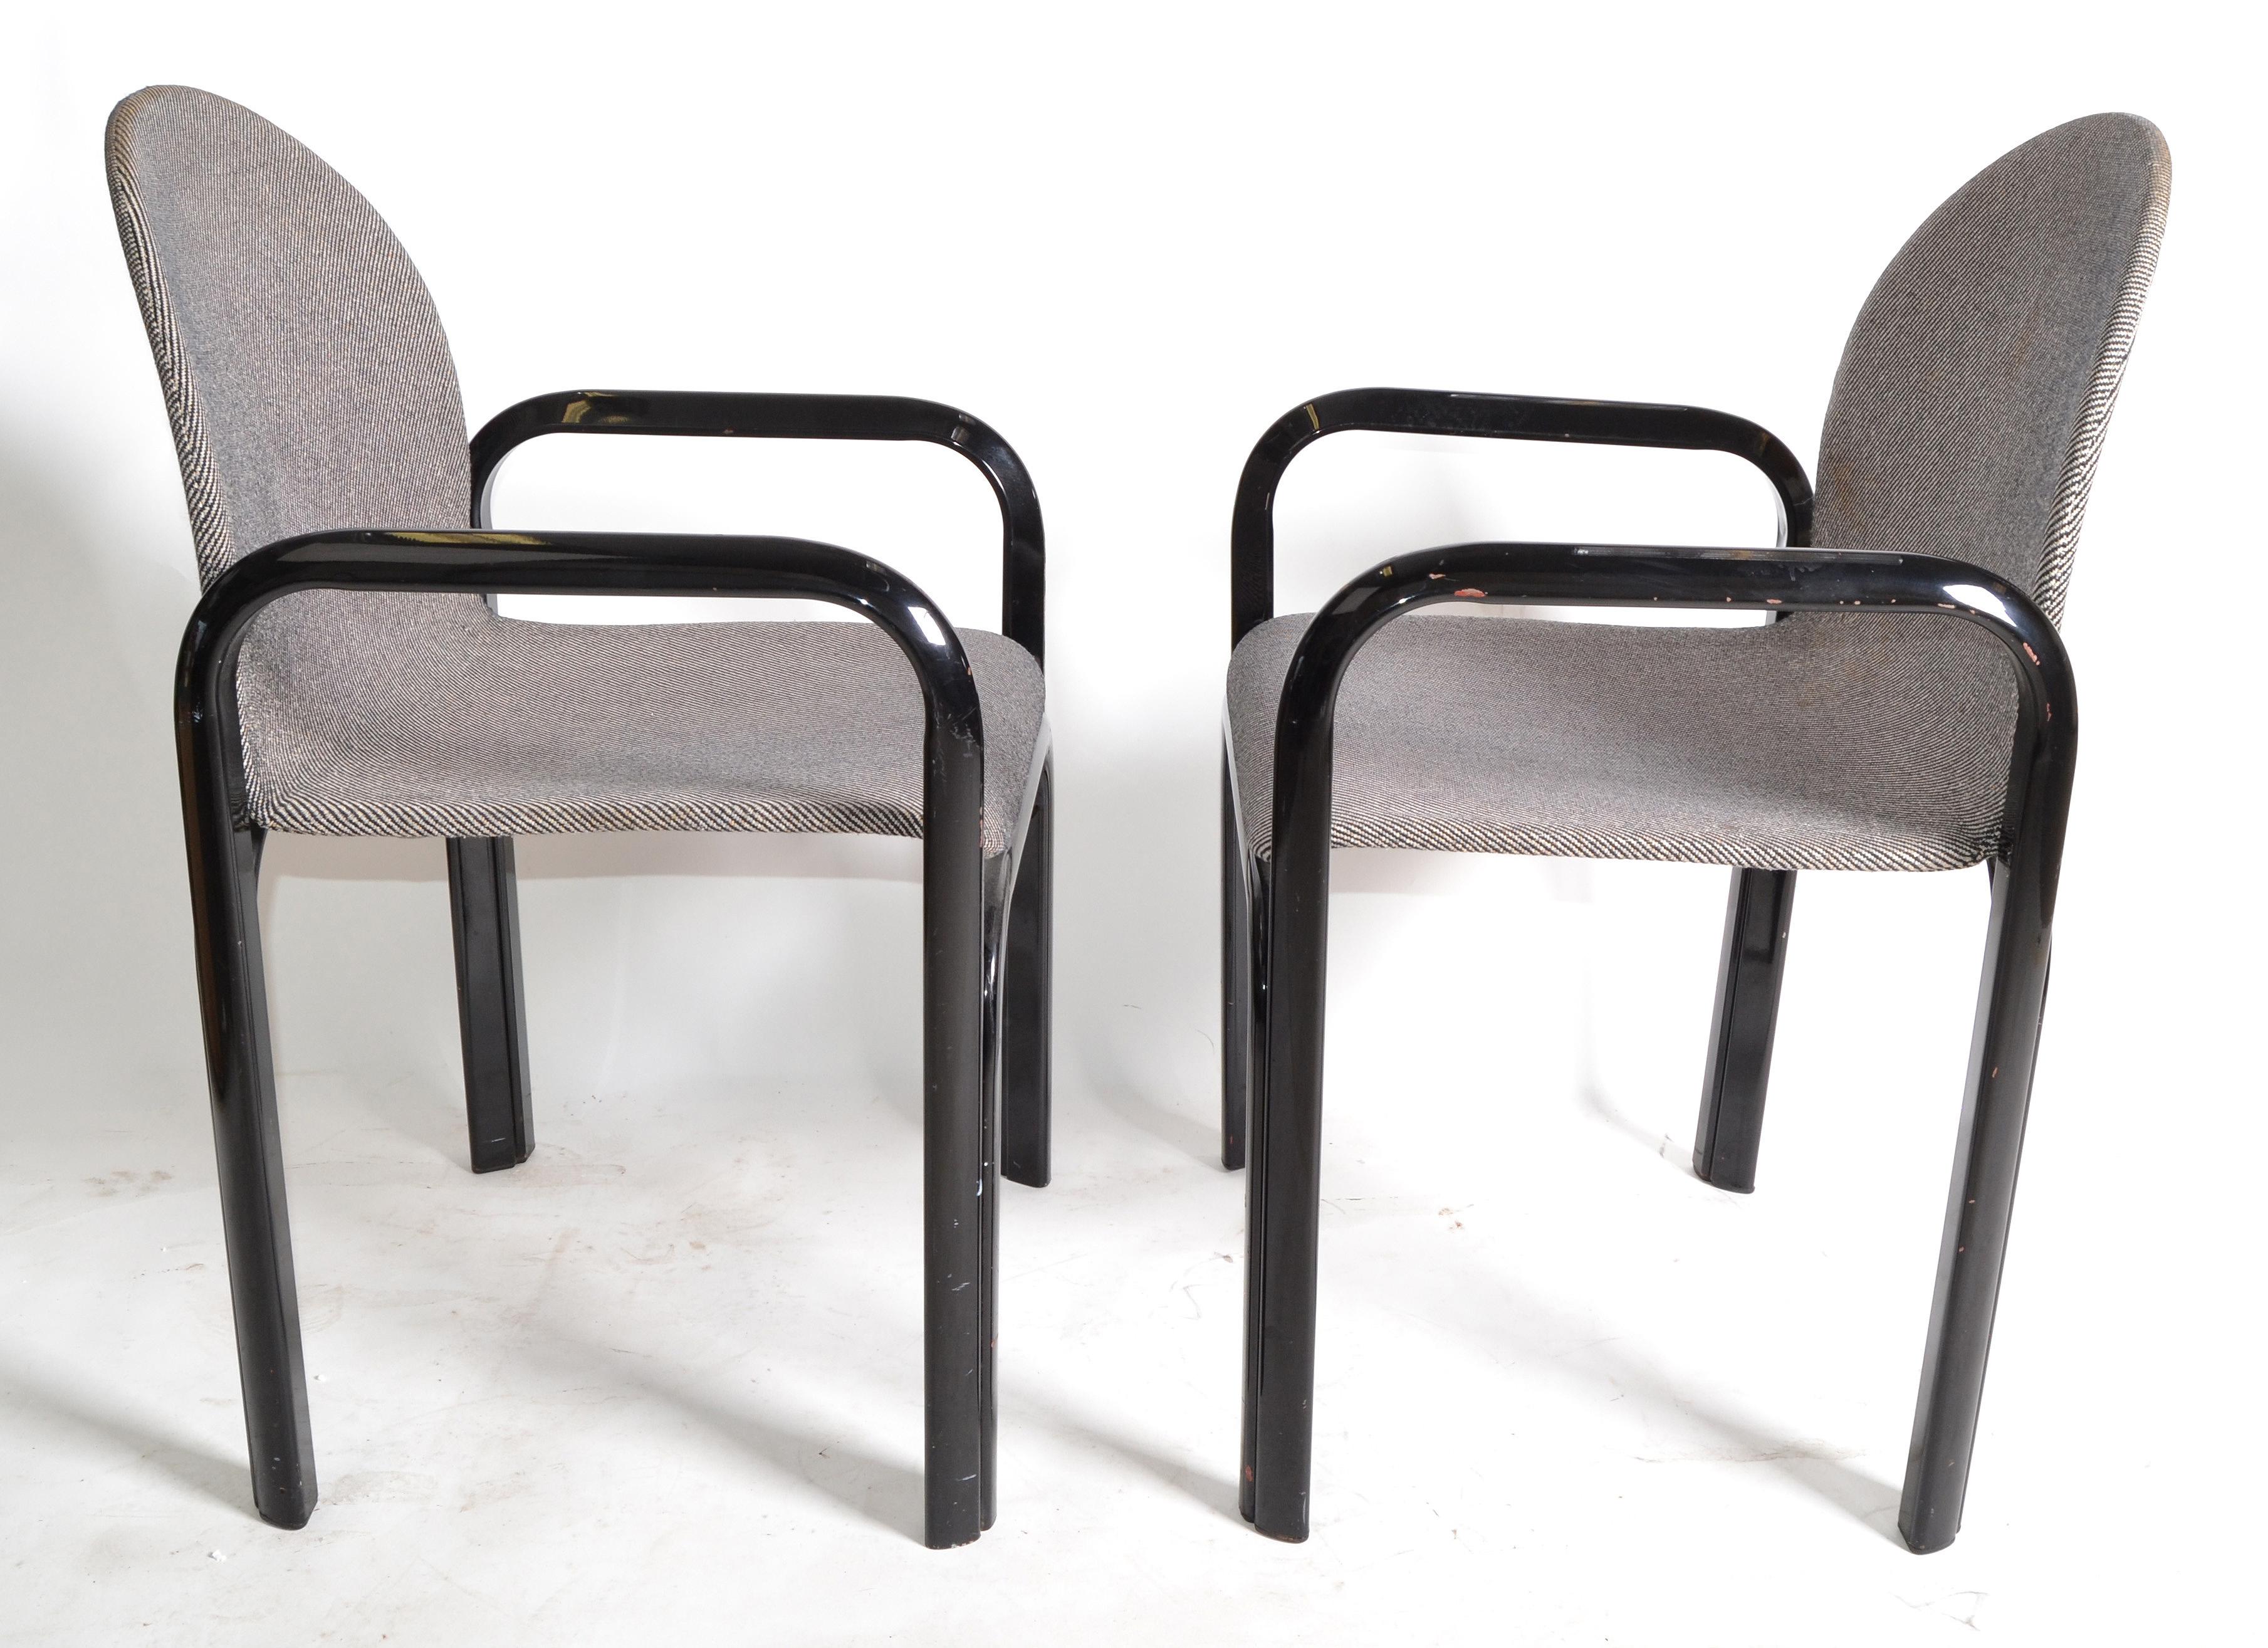 Gae Aulenti for Knoll International Armchairs Mid-Century Modern 1975, Pair In Good Condition For Sale In Miami, FL